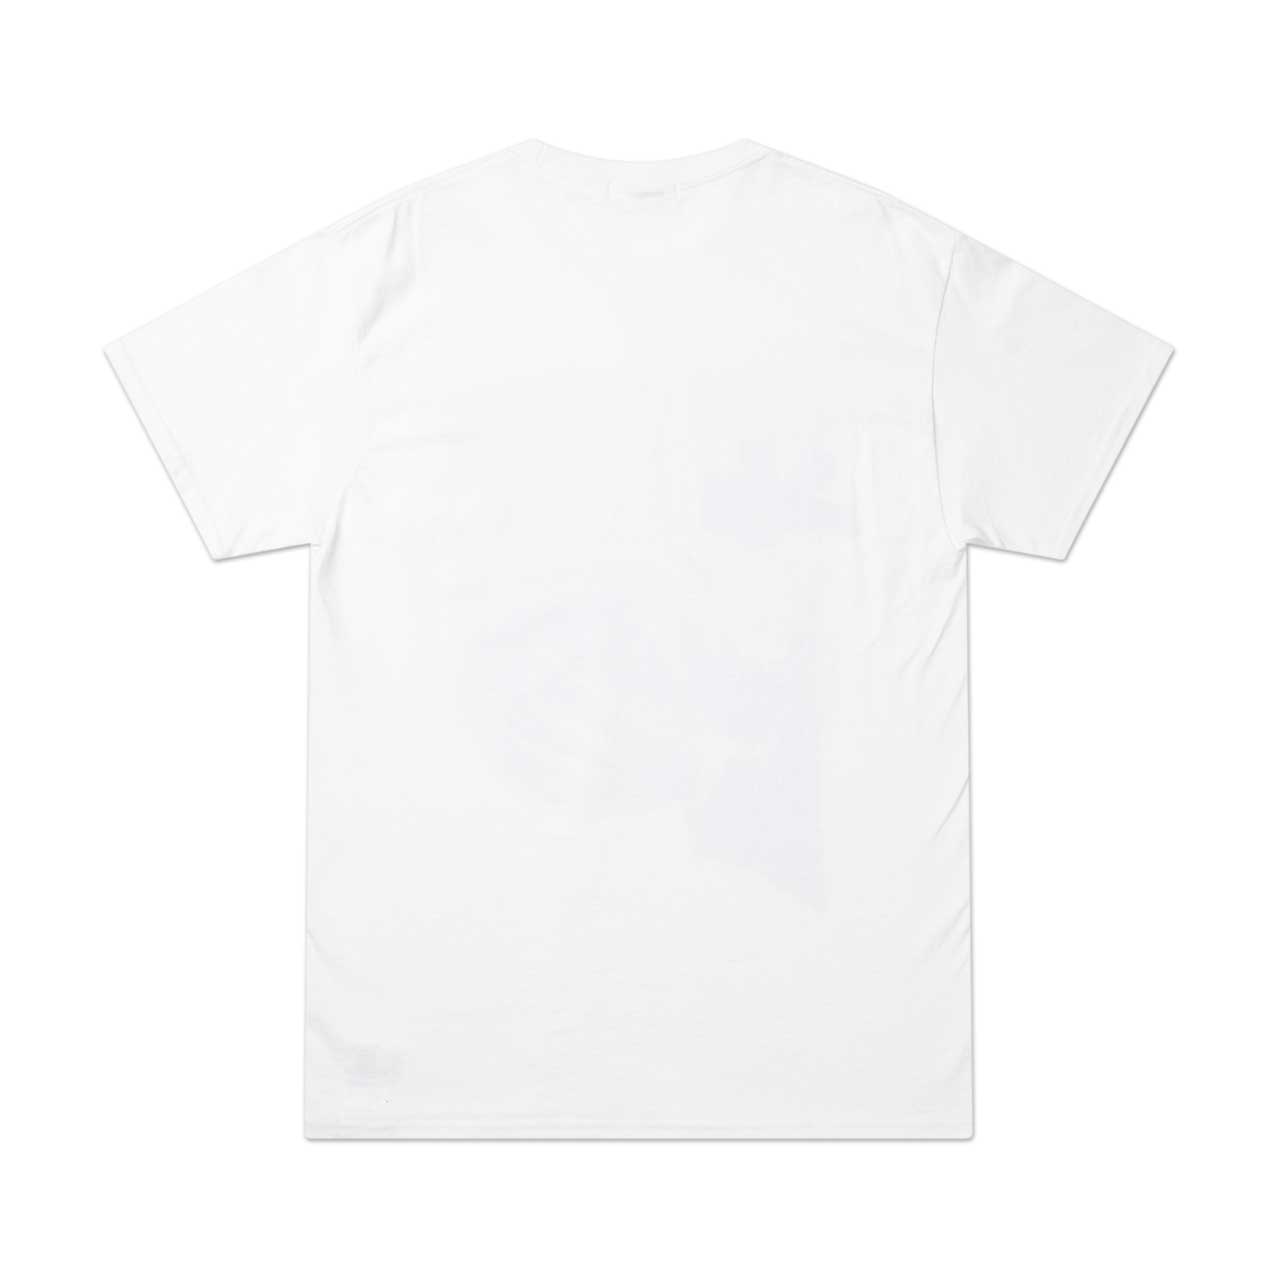 flagstuff "cut up" s/s tee (white) - 20aw-fs-78 - a.plus - Image - 2